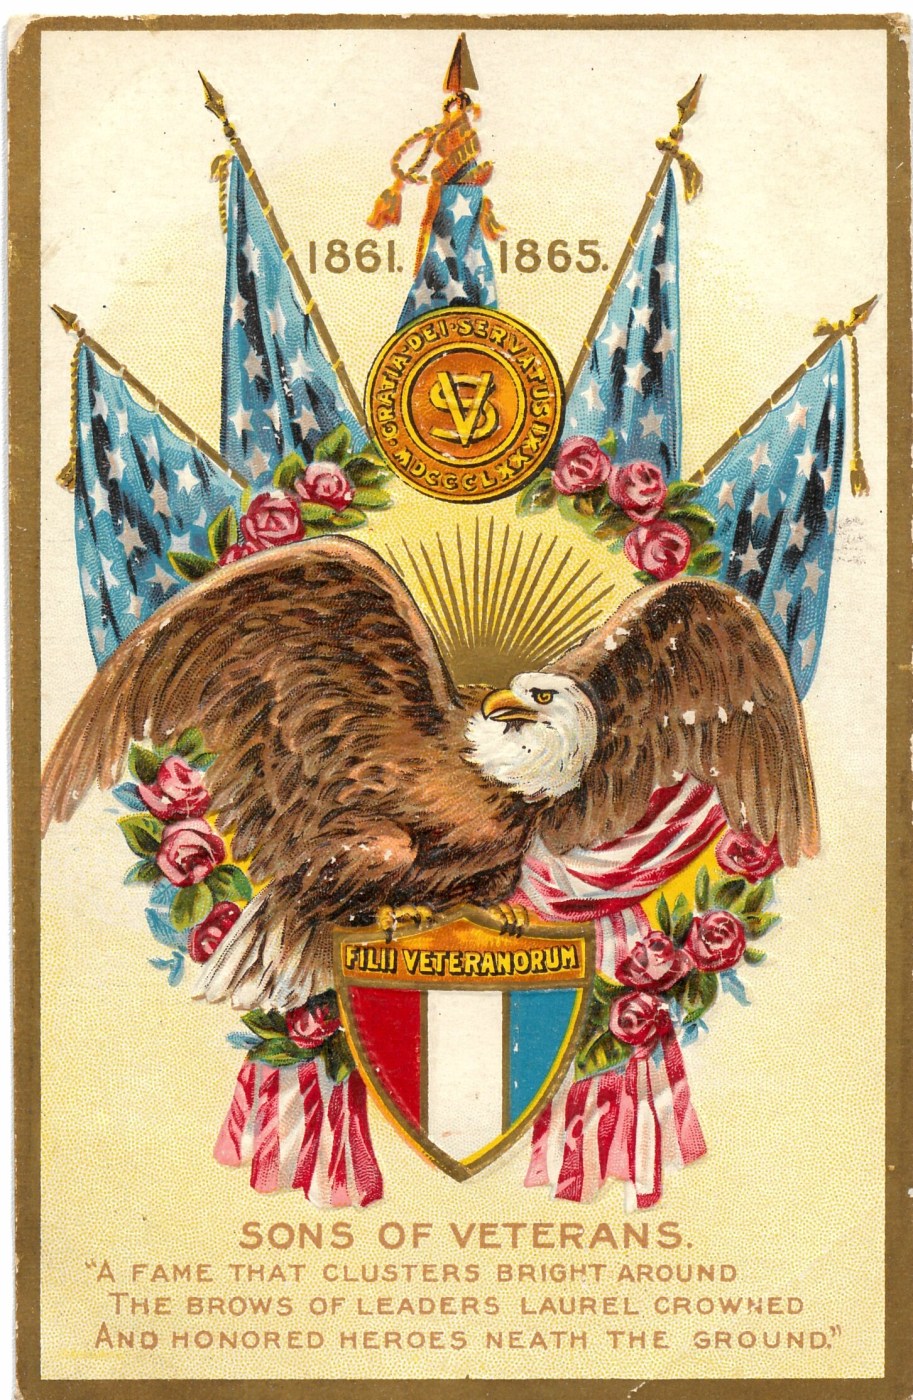 “1861 - 1865. Sons of Veterans,” Decoration Series No. 1, embossed, unused, post 1907, no publisher. Verse from “The Legion Eternal” by U.S. Navy Commander C. P. Rees. Shield reads “Filii Veteranorum,” for the Sons of Union Veterans organization. (NCA)